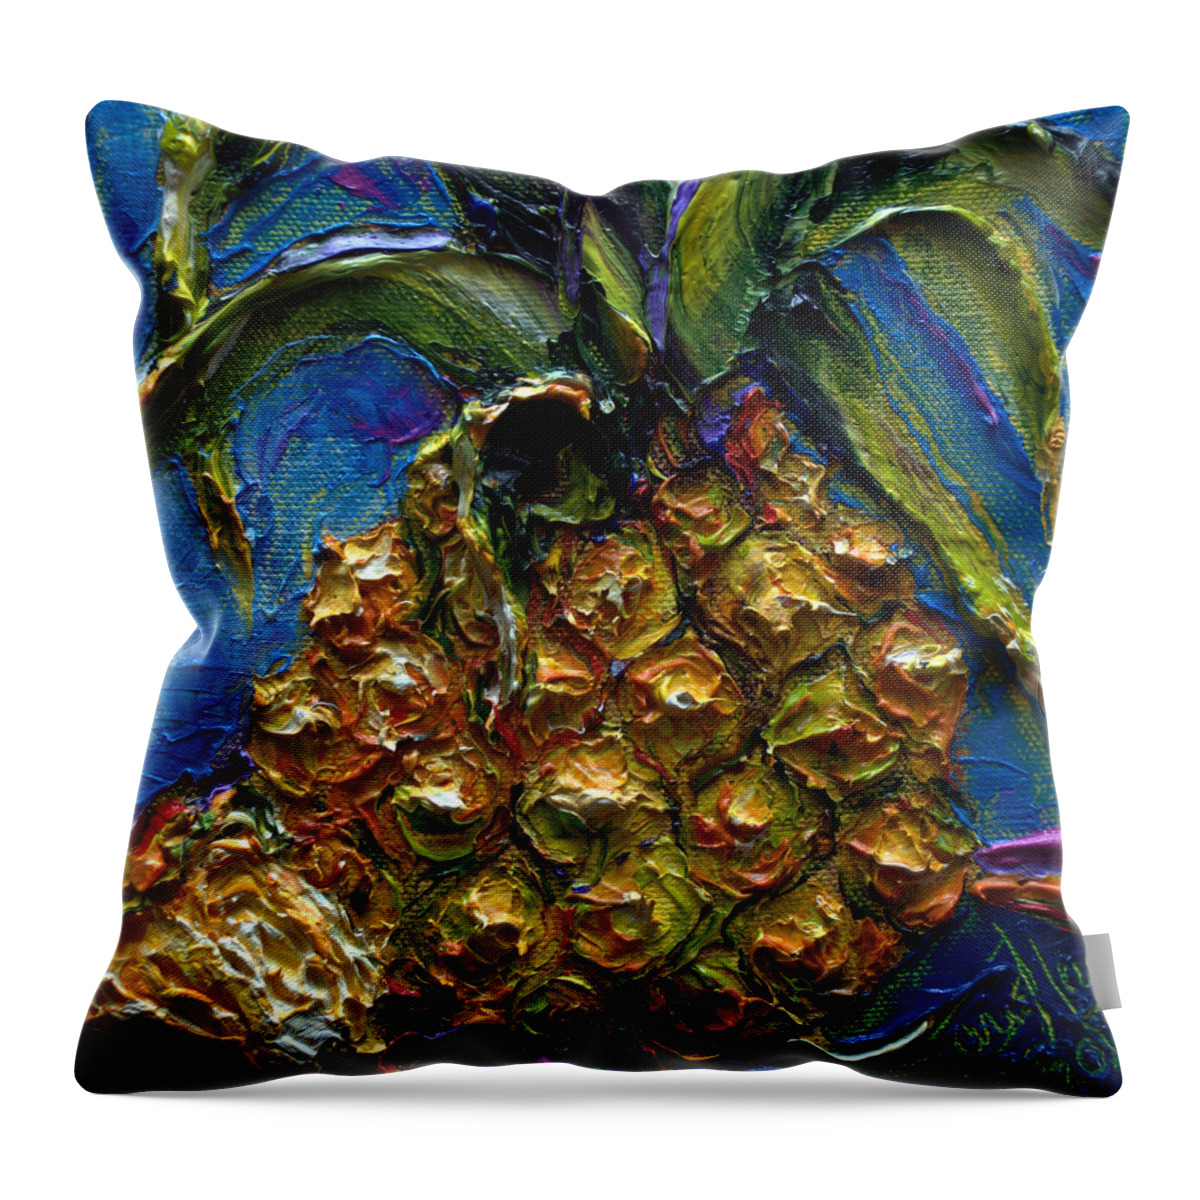 Pineapple Throw Pillow featuring the painting Fat Little Pineapple by Paris Wyatt Llanso